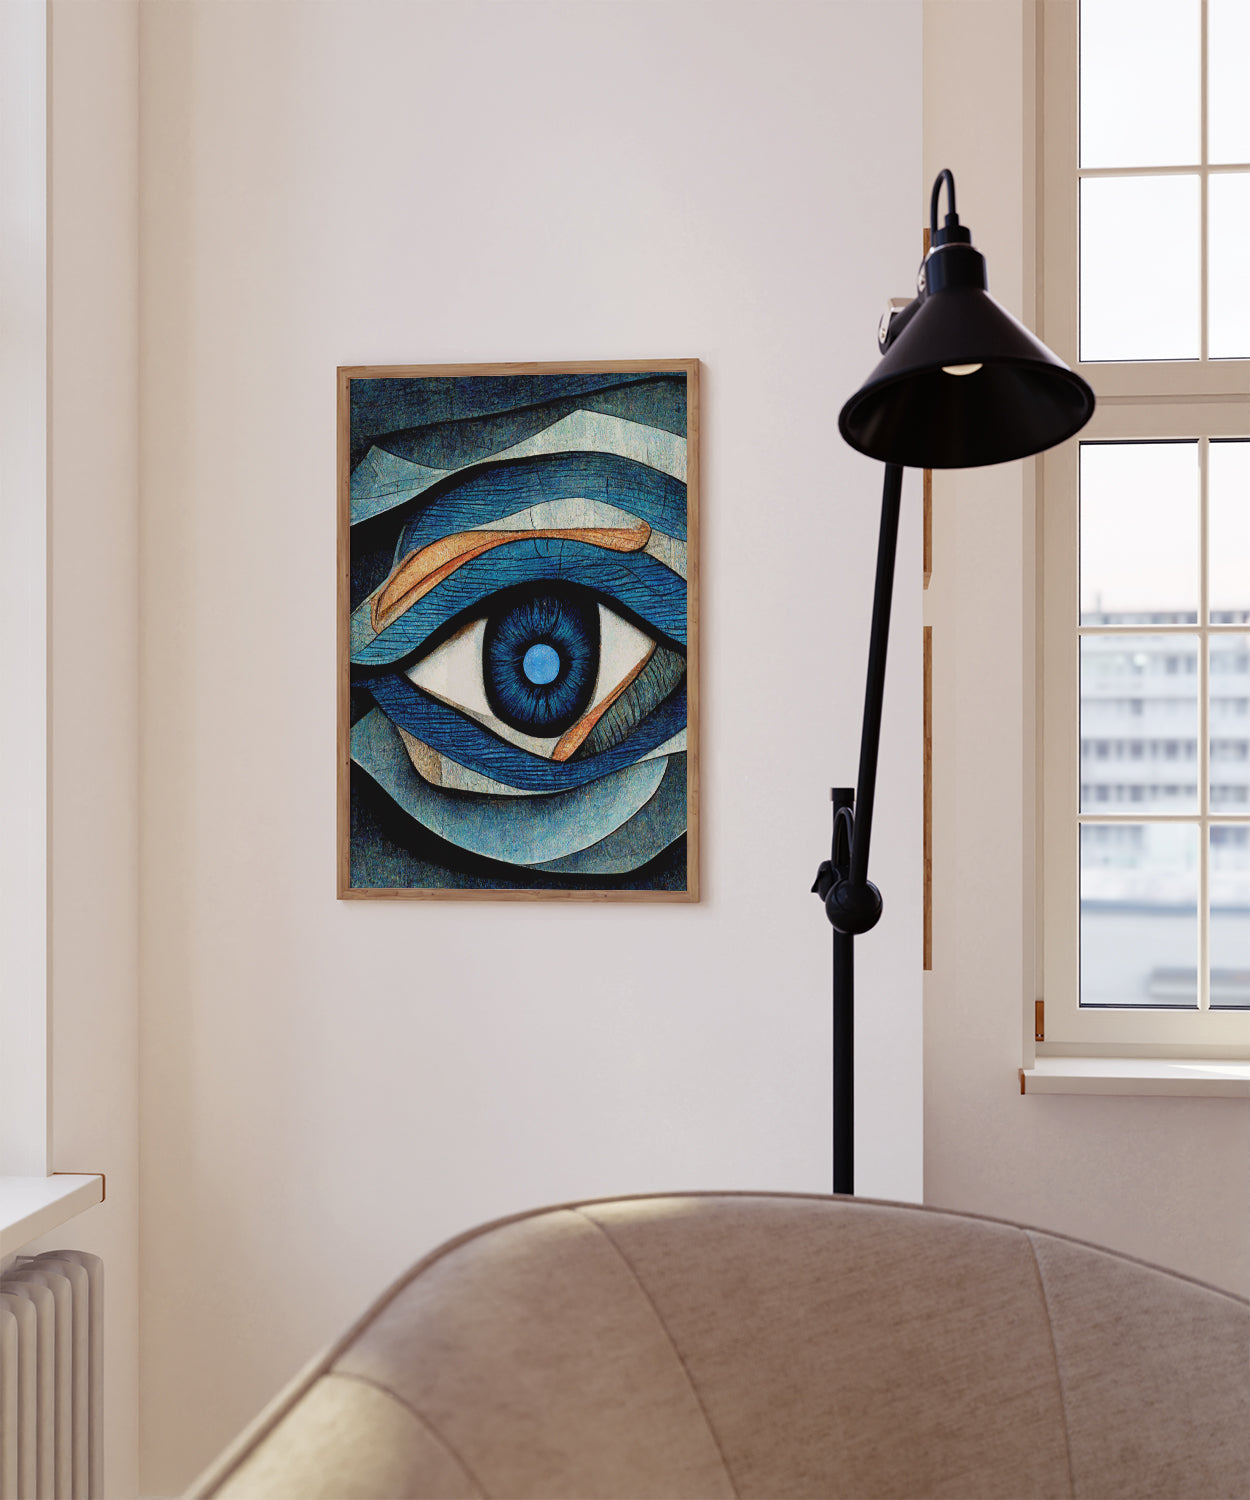 Ophthalmology Clinic Decor - Eye anatomy art as a decorative element for ophthalmology clinics or medical spaces.